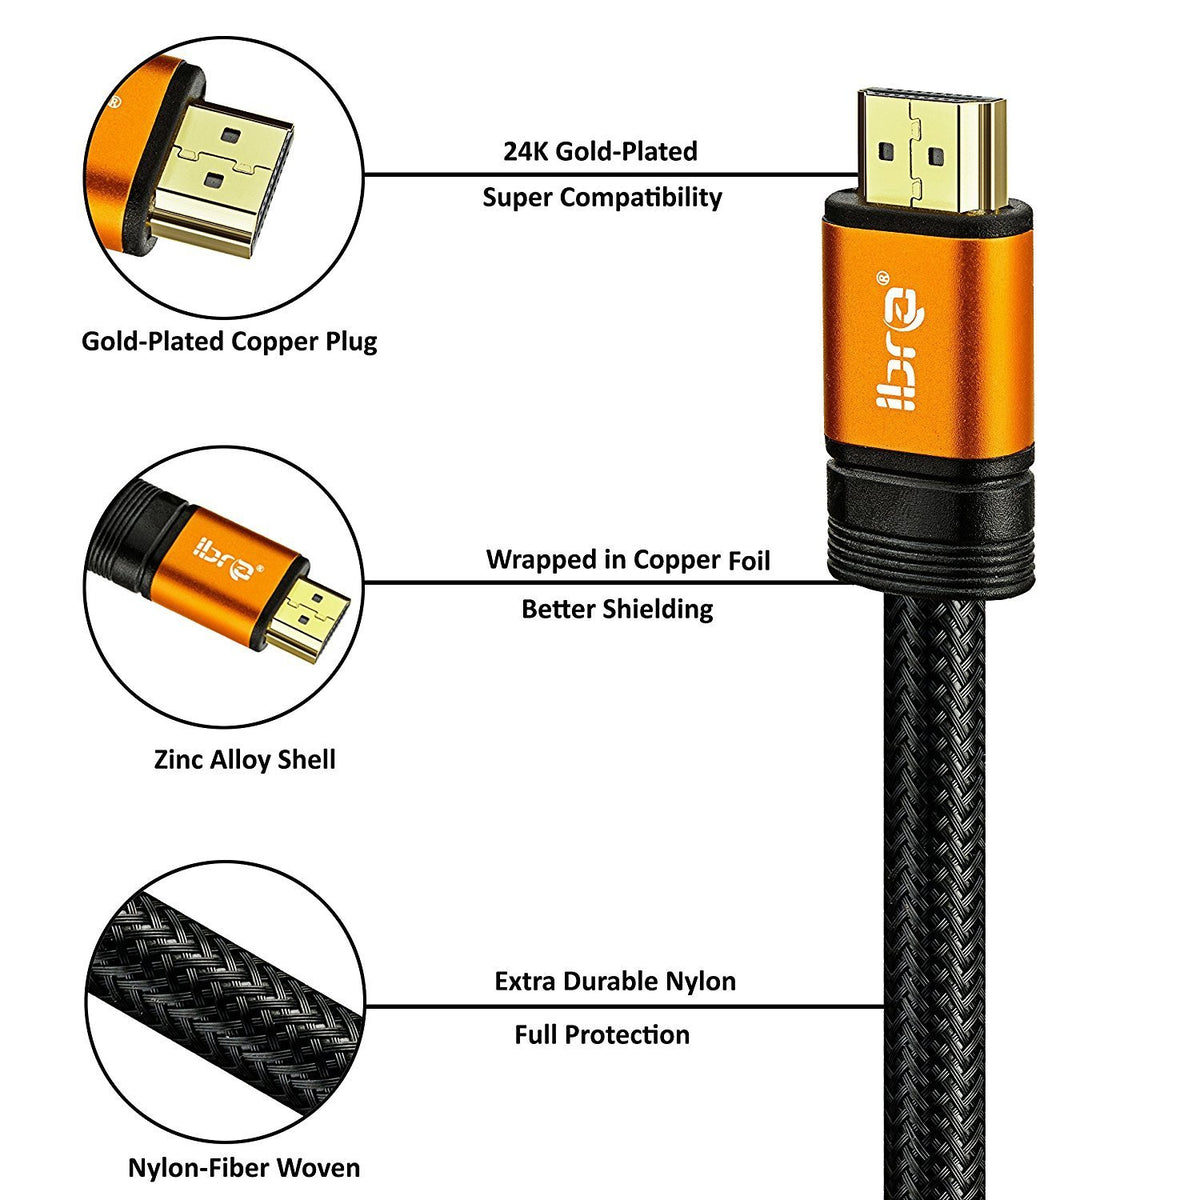 IBRA Orange HDMI Cable 5M - UHD HDMI 2.0 (4K@60Hz) Ready -18Gbps-28AWG Braided Cord -Gold Plated Connectors -Ethernet,Audio Return-Video 4K 2160p,HD 1080p,3D -Xbox PlayStation PS3 PS4 PC Apple TV